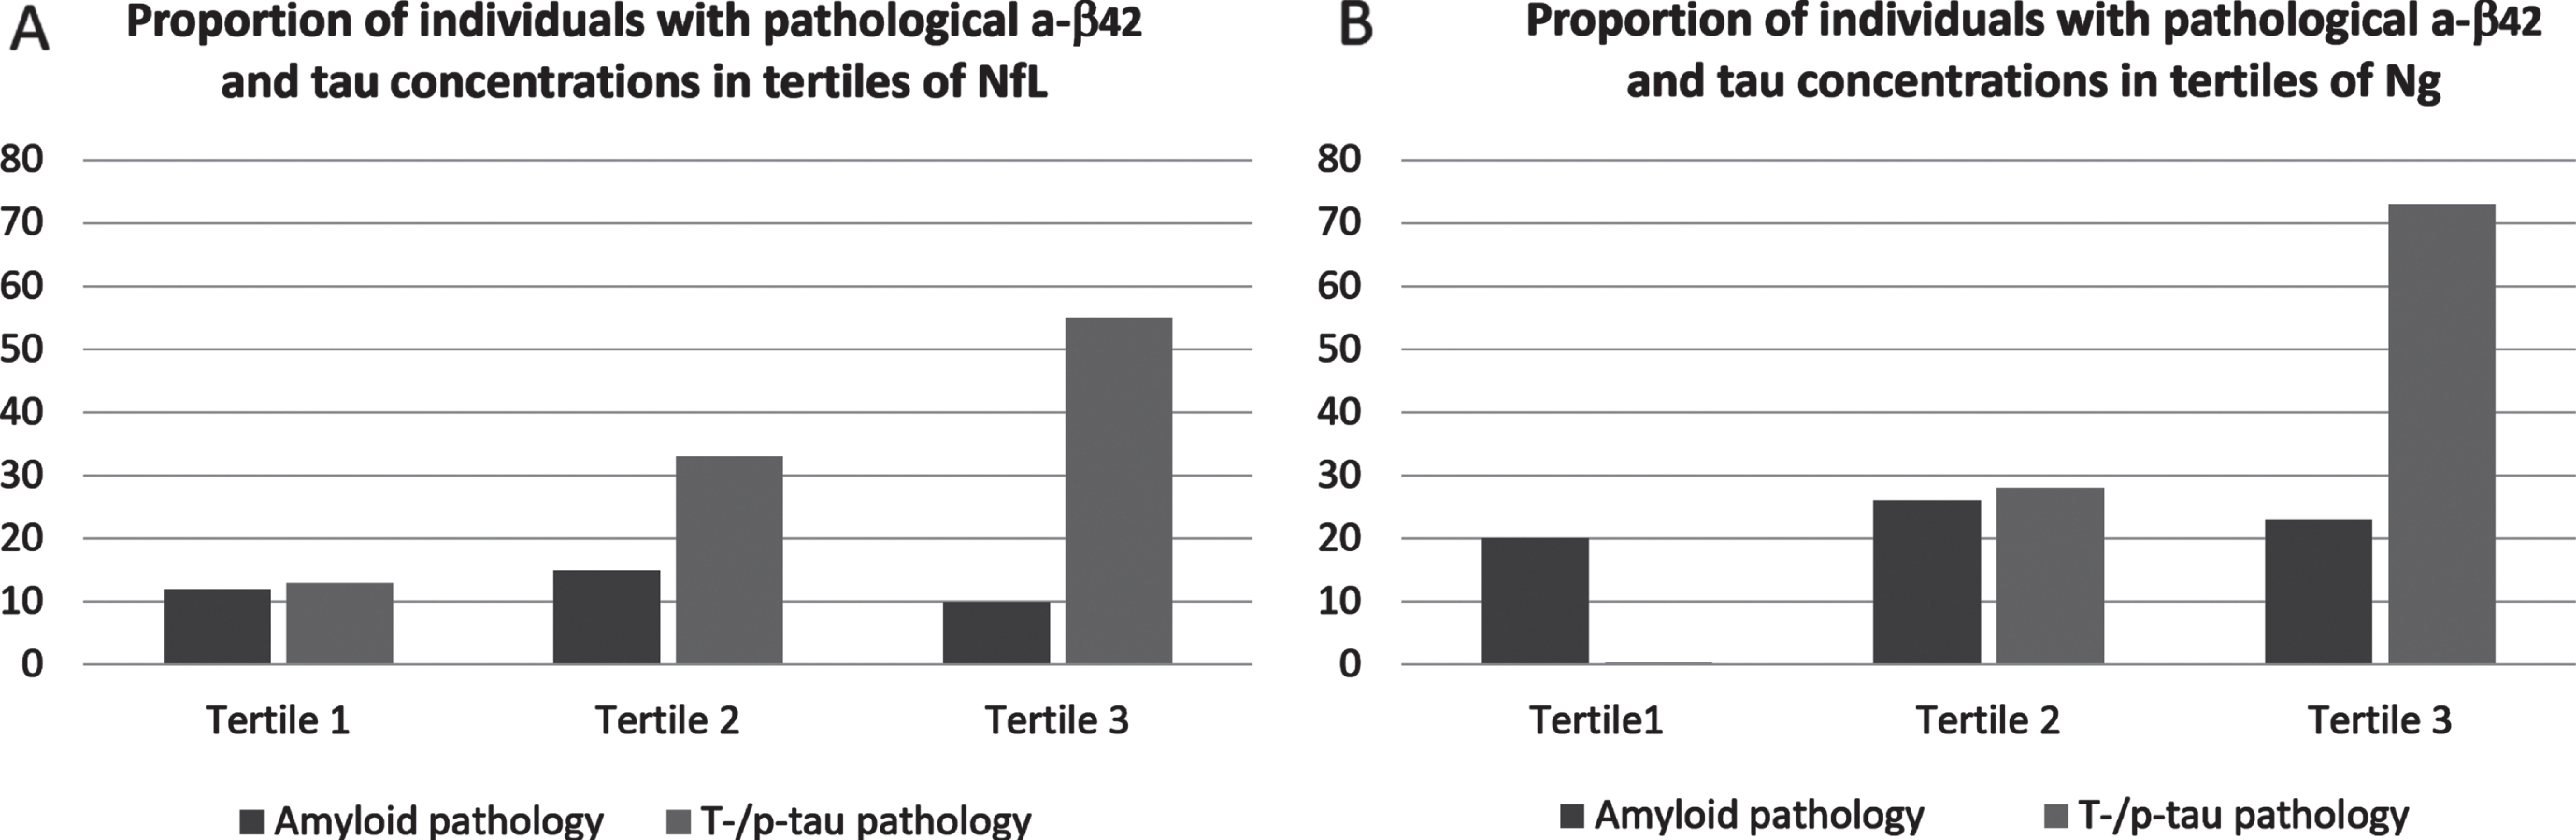 Proportions of participants with pathological concentrations of Aβ42 and tau in tertiles of NfL (A) and tertiles of Ng (B).